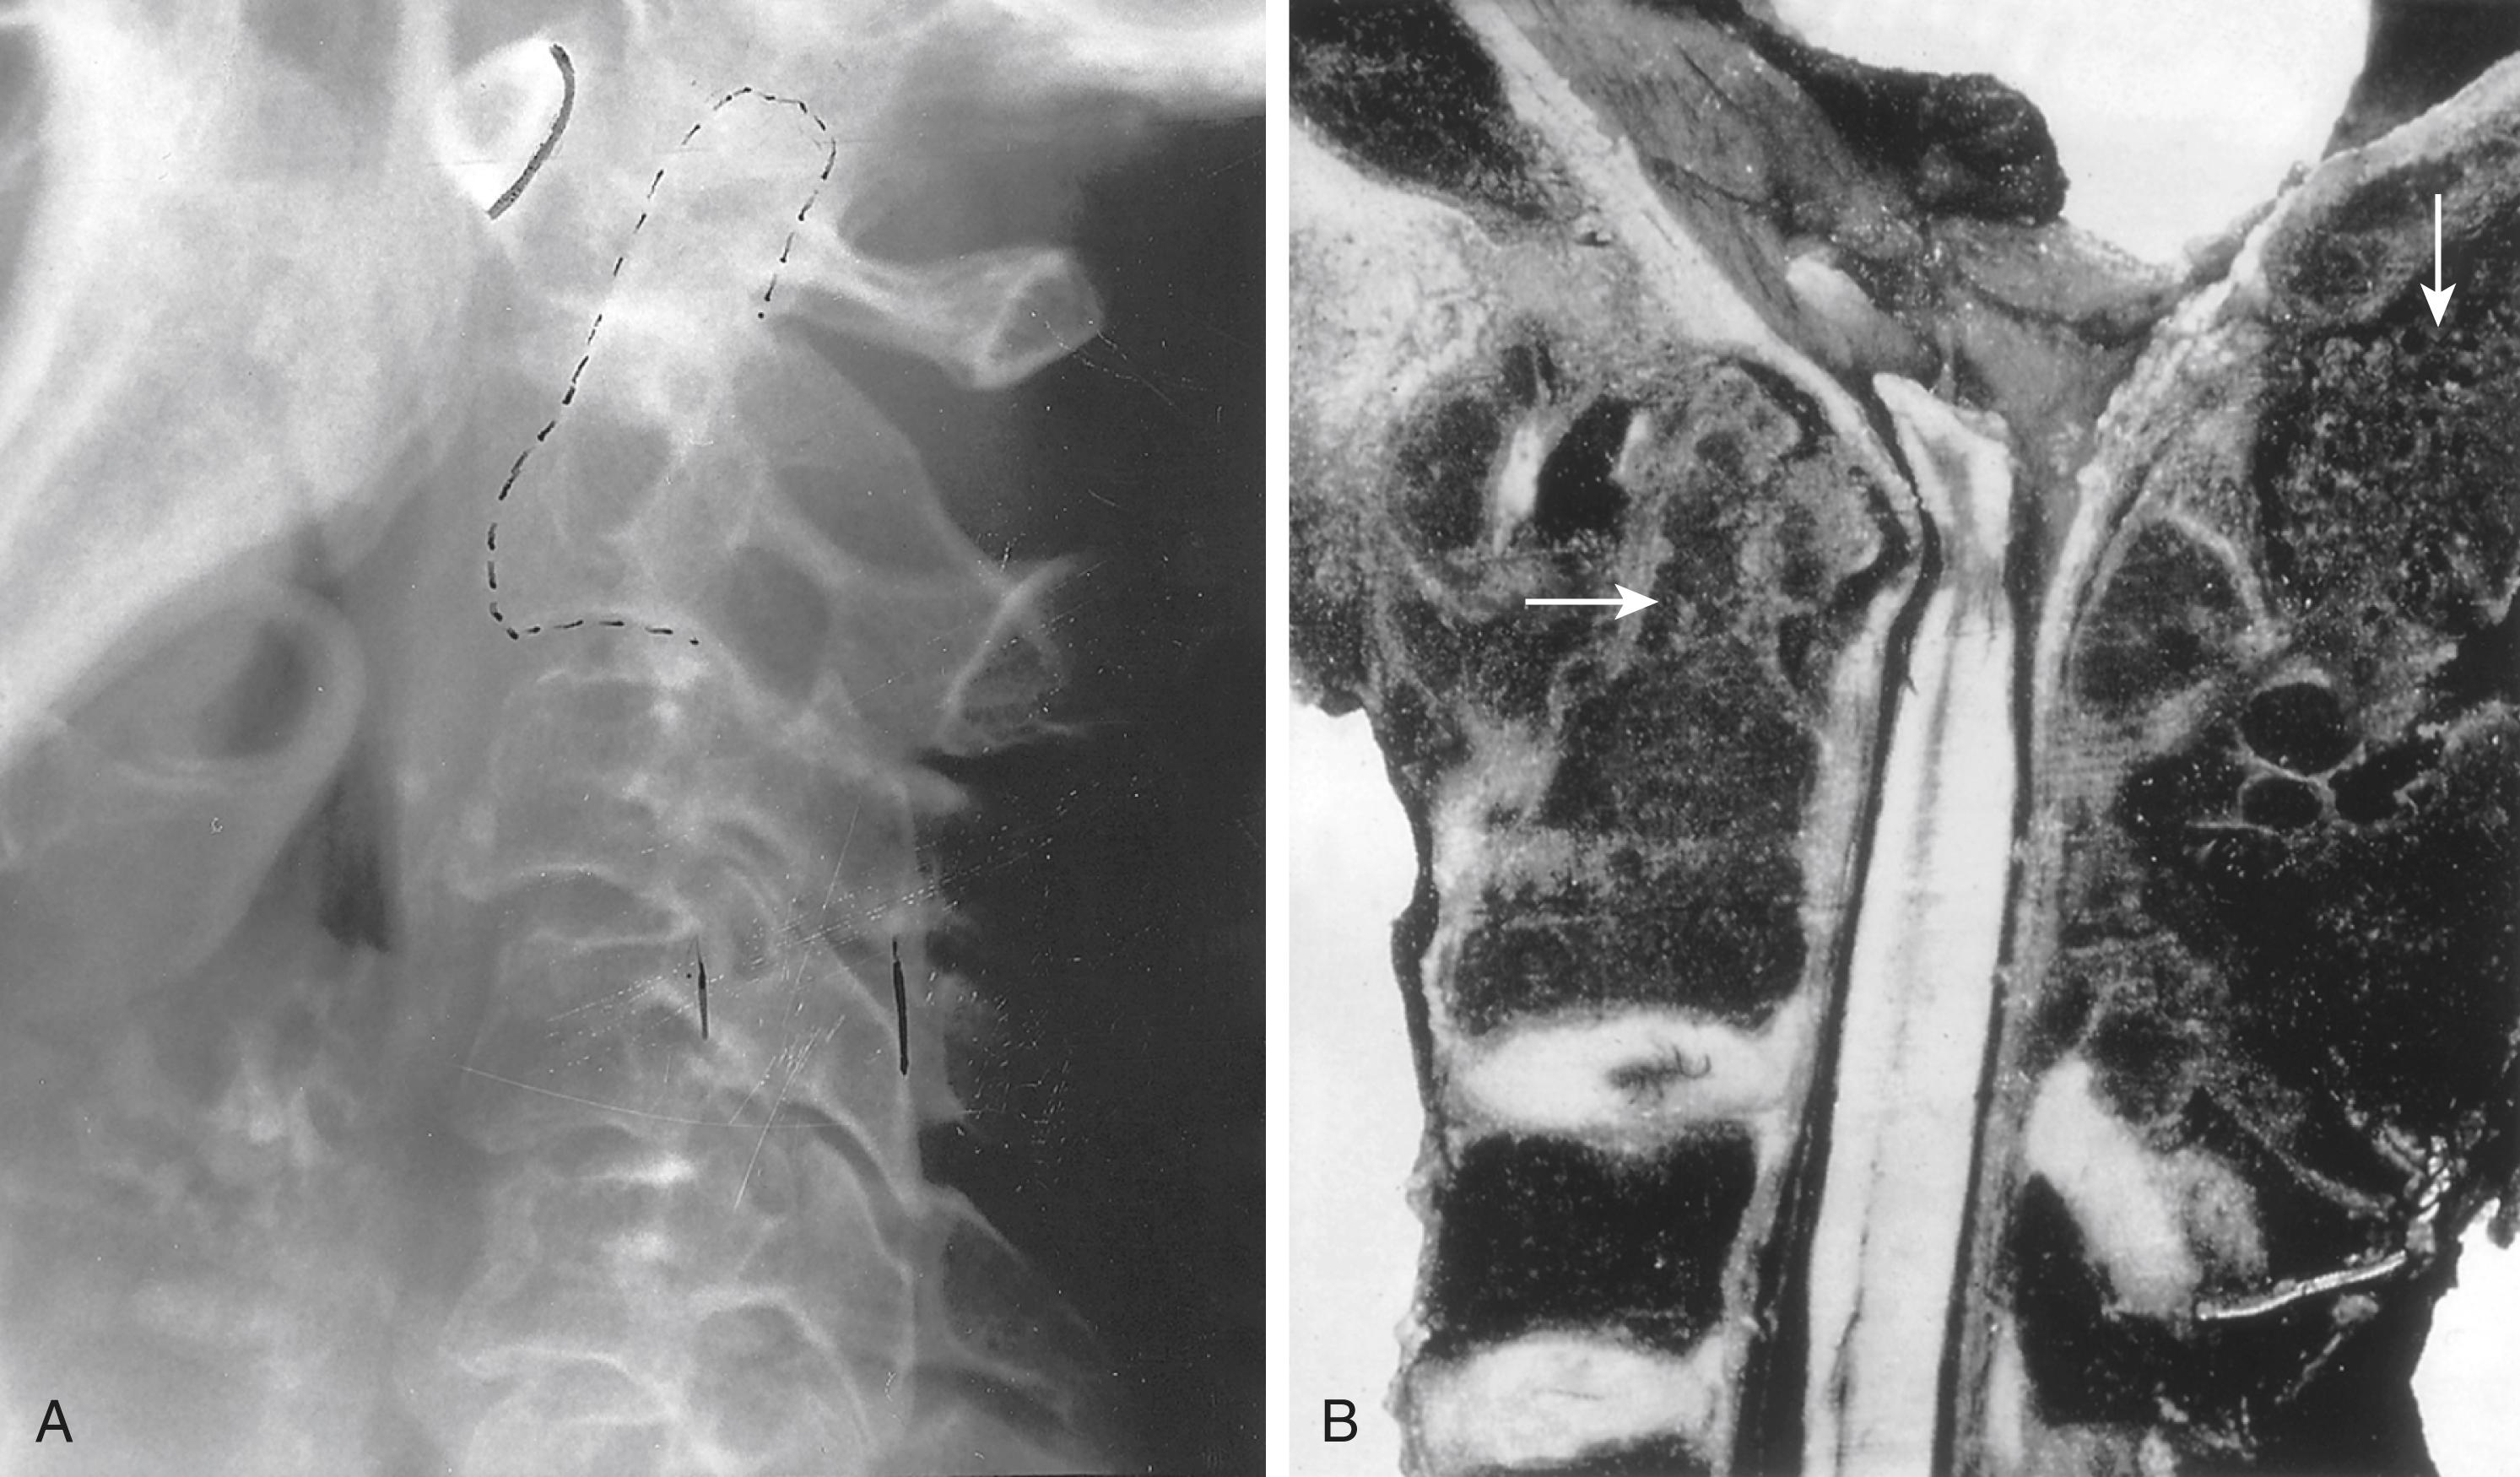 FIGURE 243-2, Subluxation of the cervical spine in patients with rheumatoid arthritis.